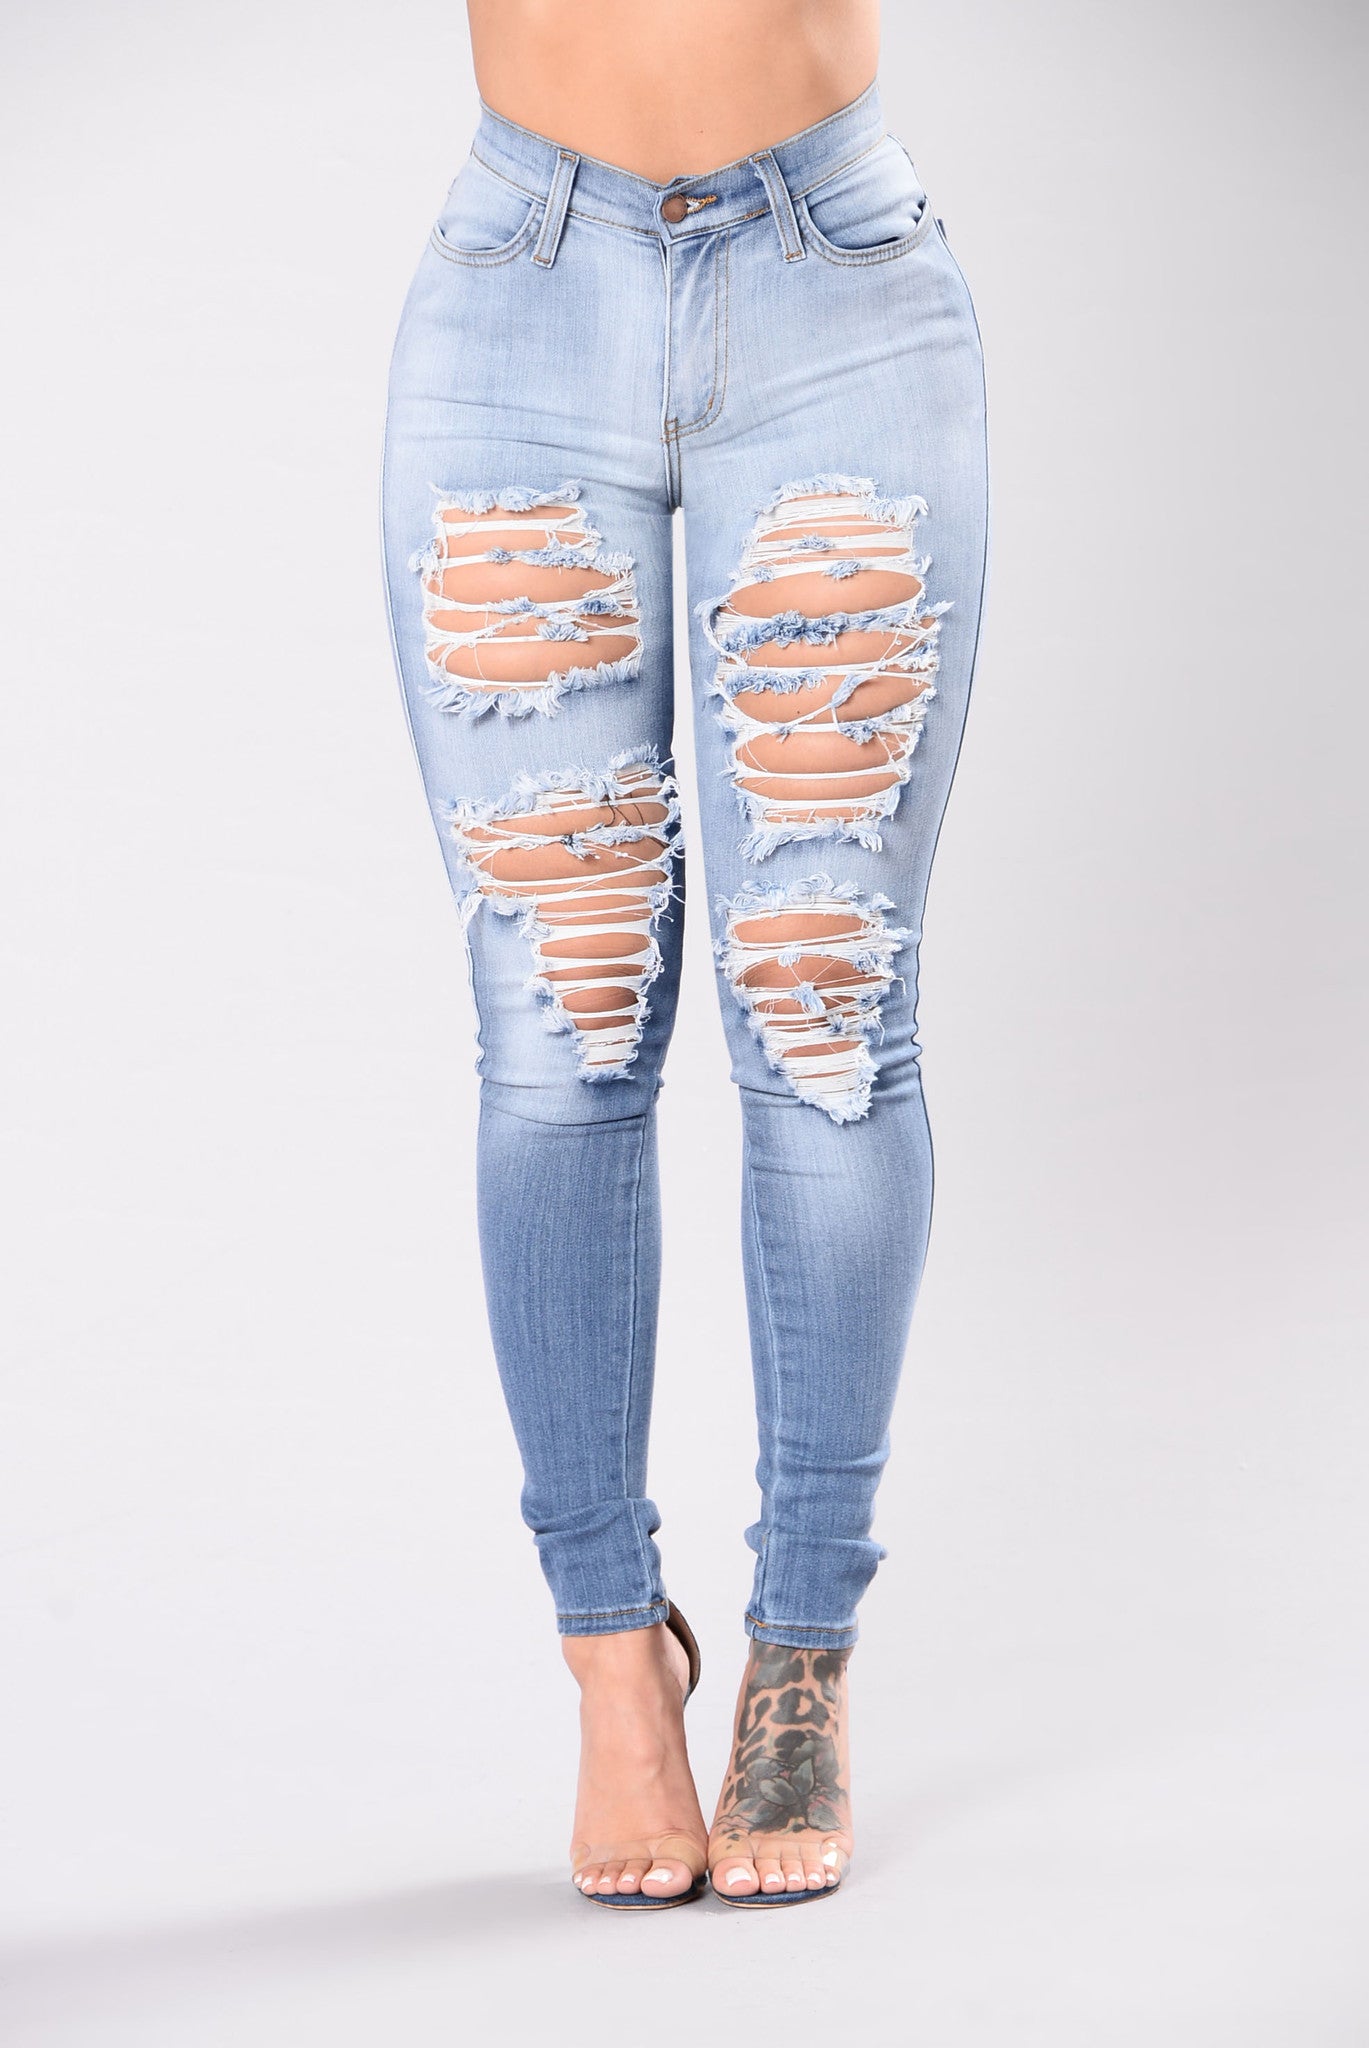 Casual Girl Jeans - Light Wash